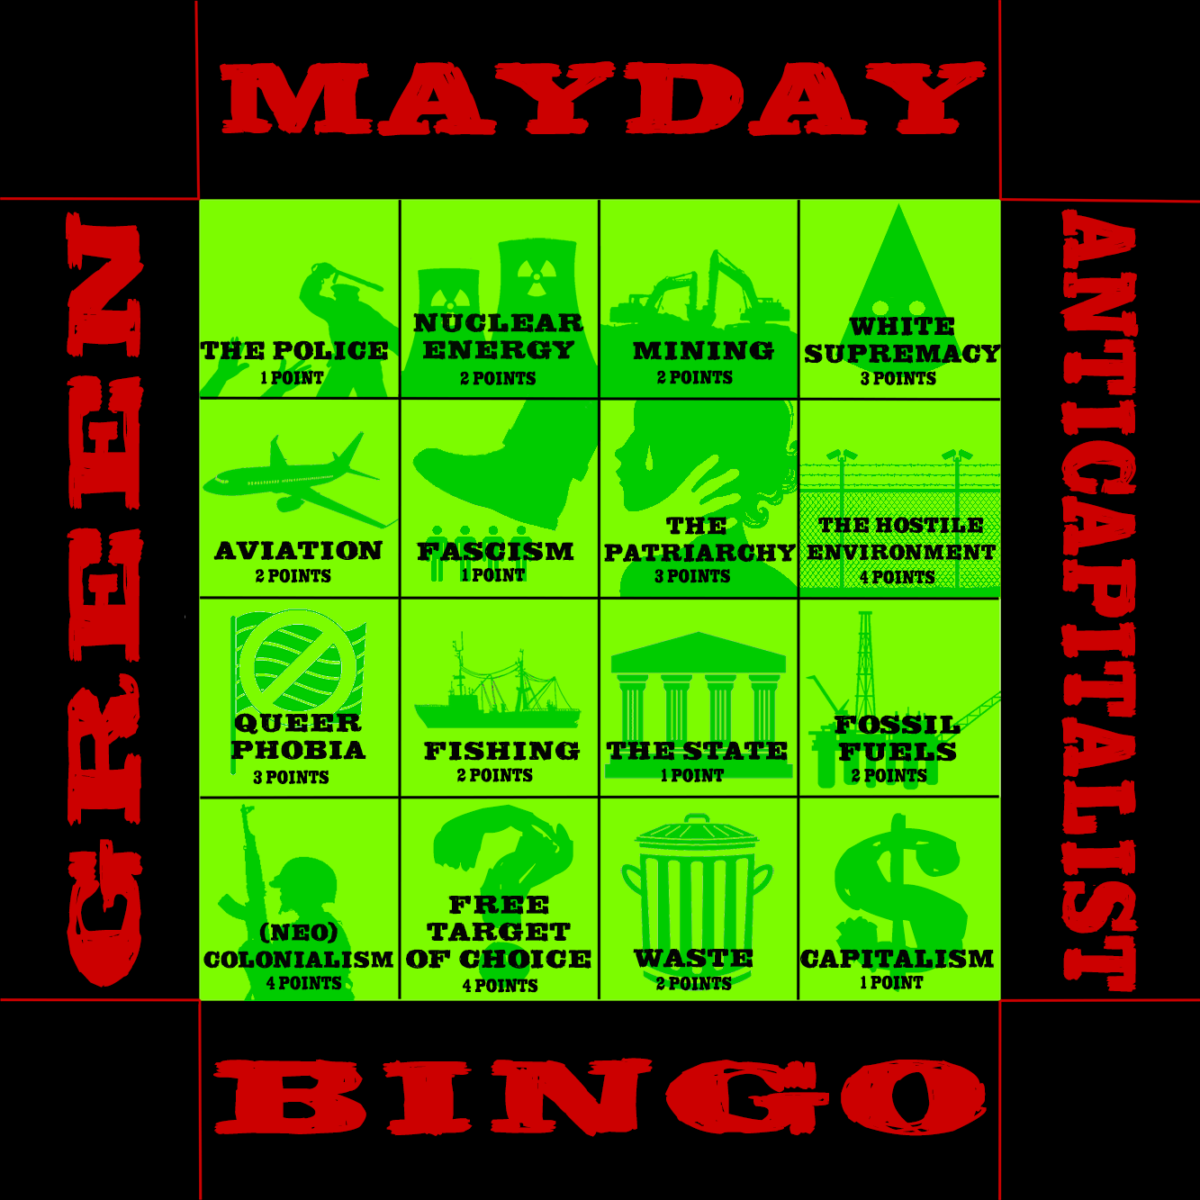 Further advice on how to participate in the Mayday Bingo